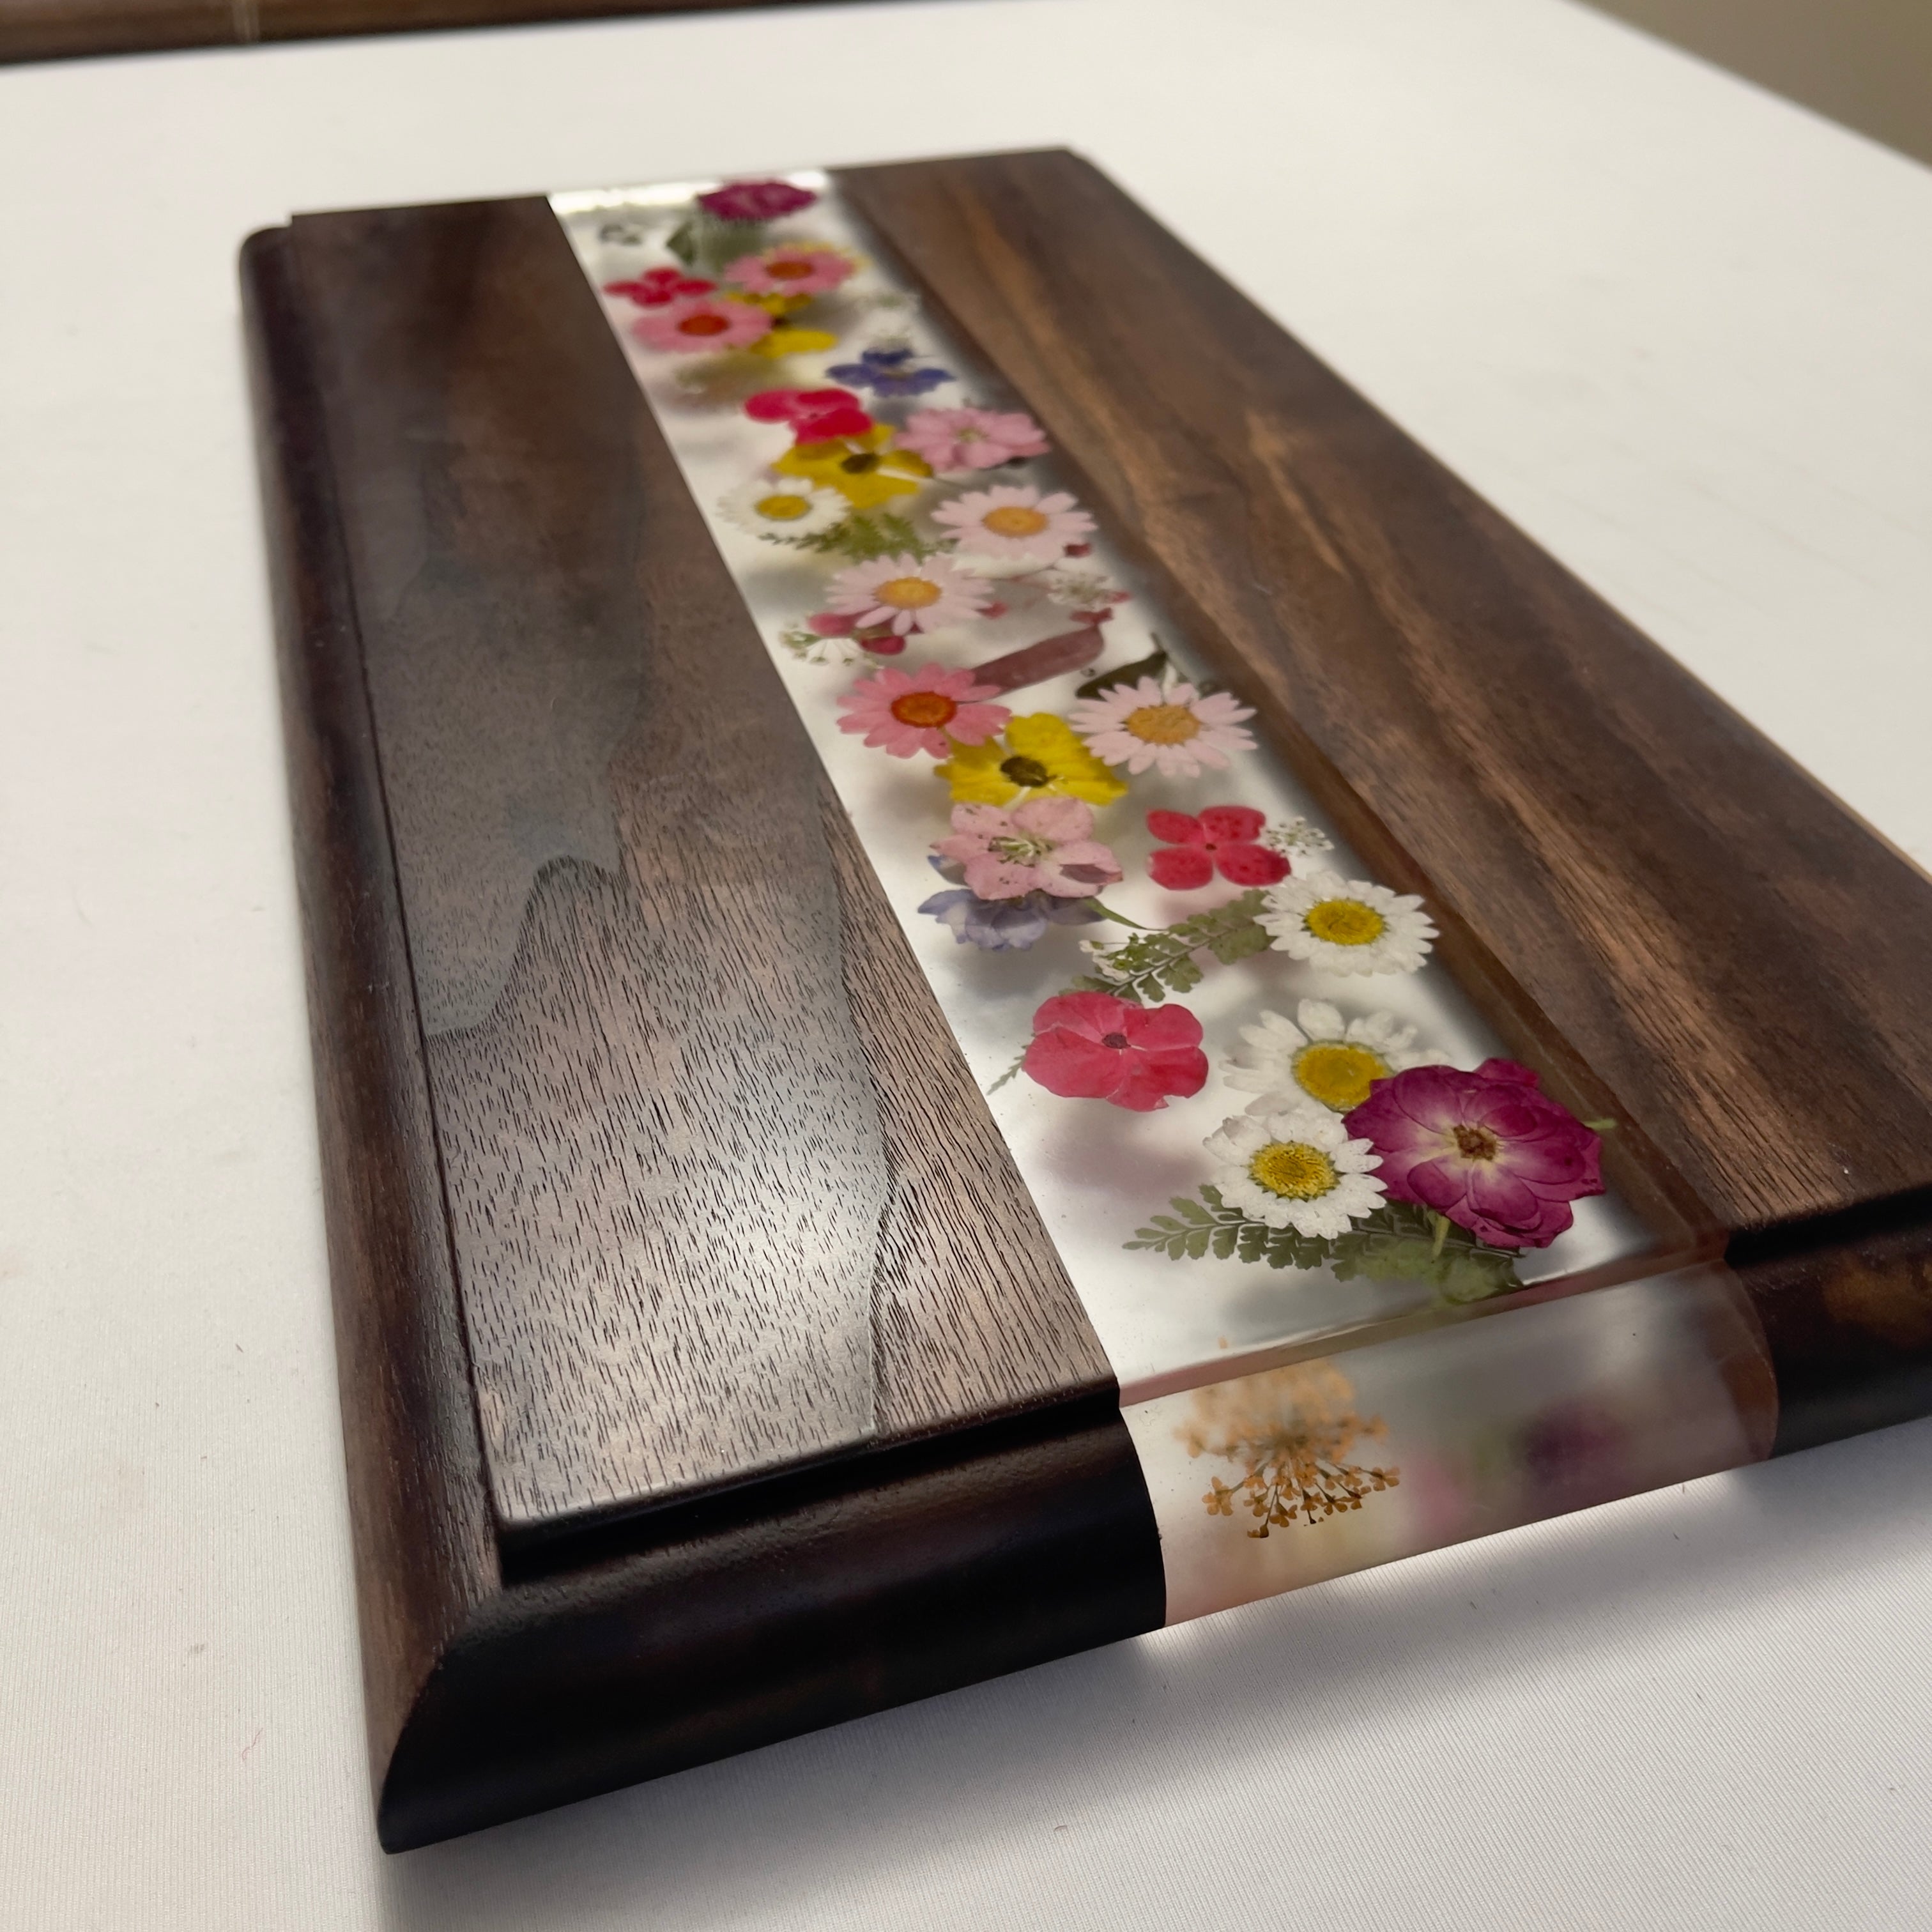 Flower boards - We have the wood